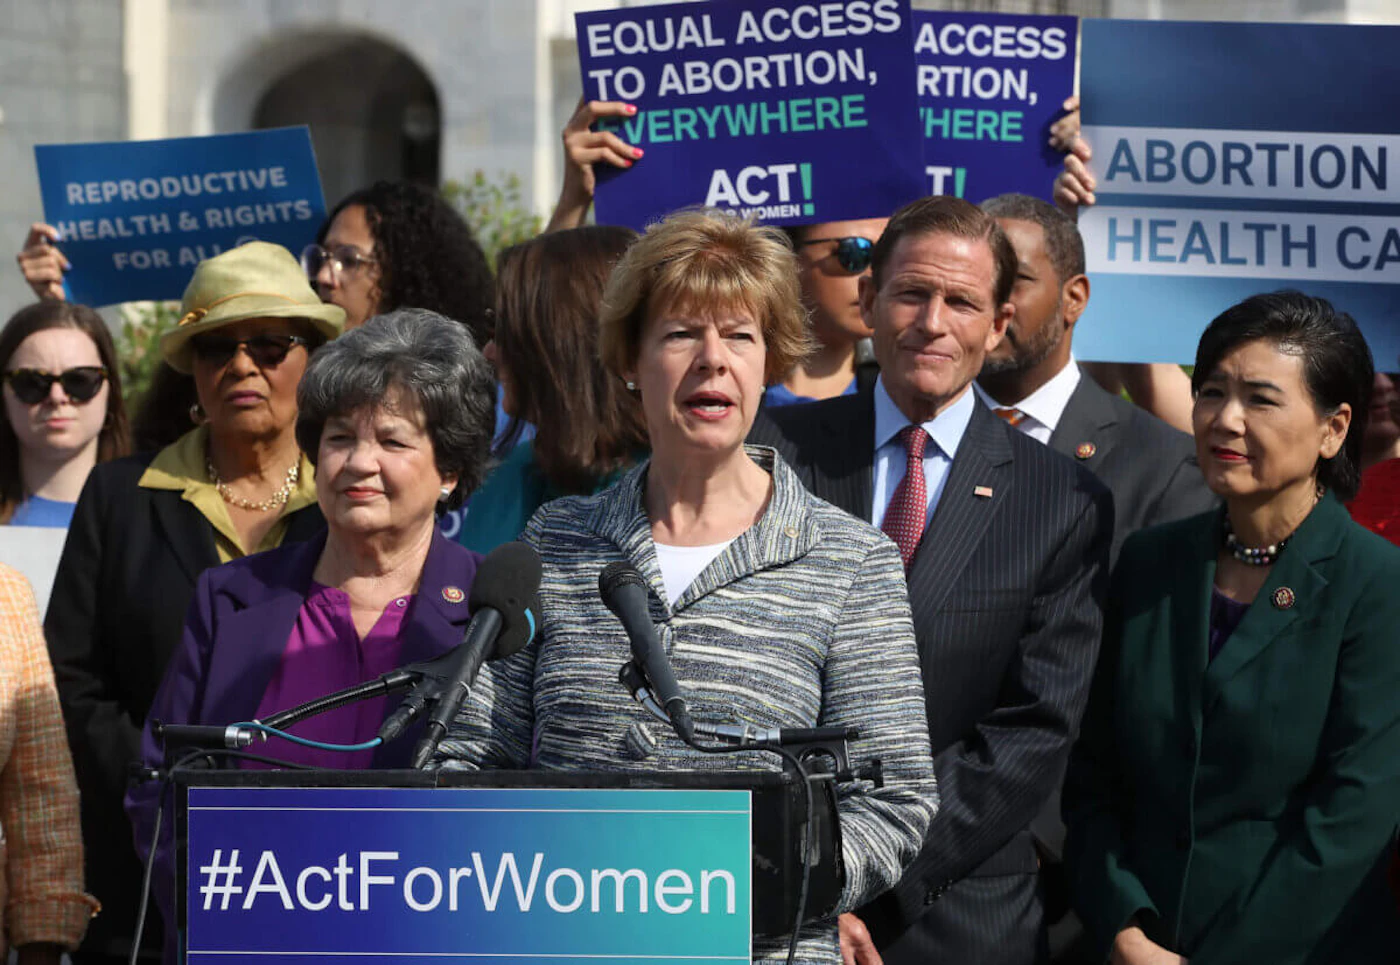 Sen. Tammy Baldwin (D-WI) speaks during a news conference regarding women’s health care, on Capitol Hill May 23, 2019 in Washington, DC. The news conference was held to discuss the reintroduction of the "Women's Health Protection Act " and address the state-based attacks on abortion rights. (Photo by Mark Wilson/Getty Images)